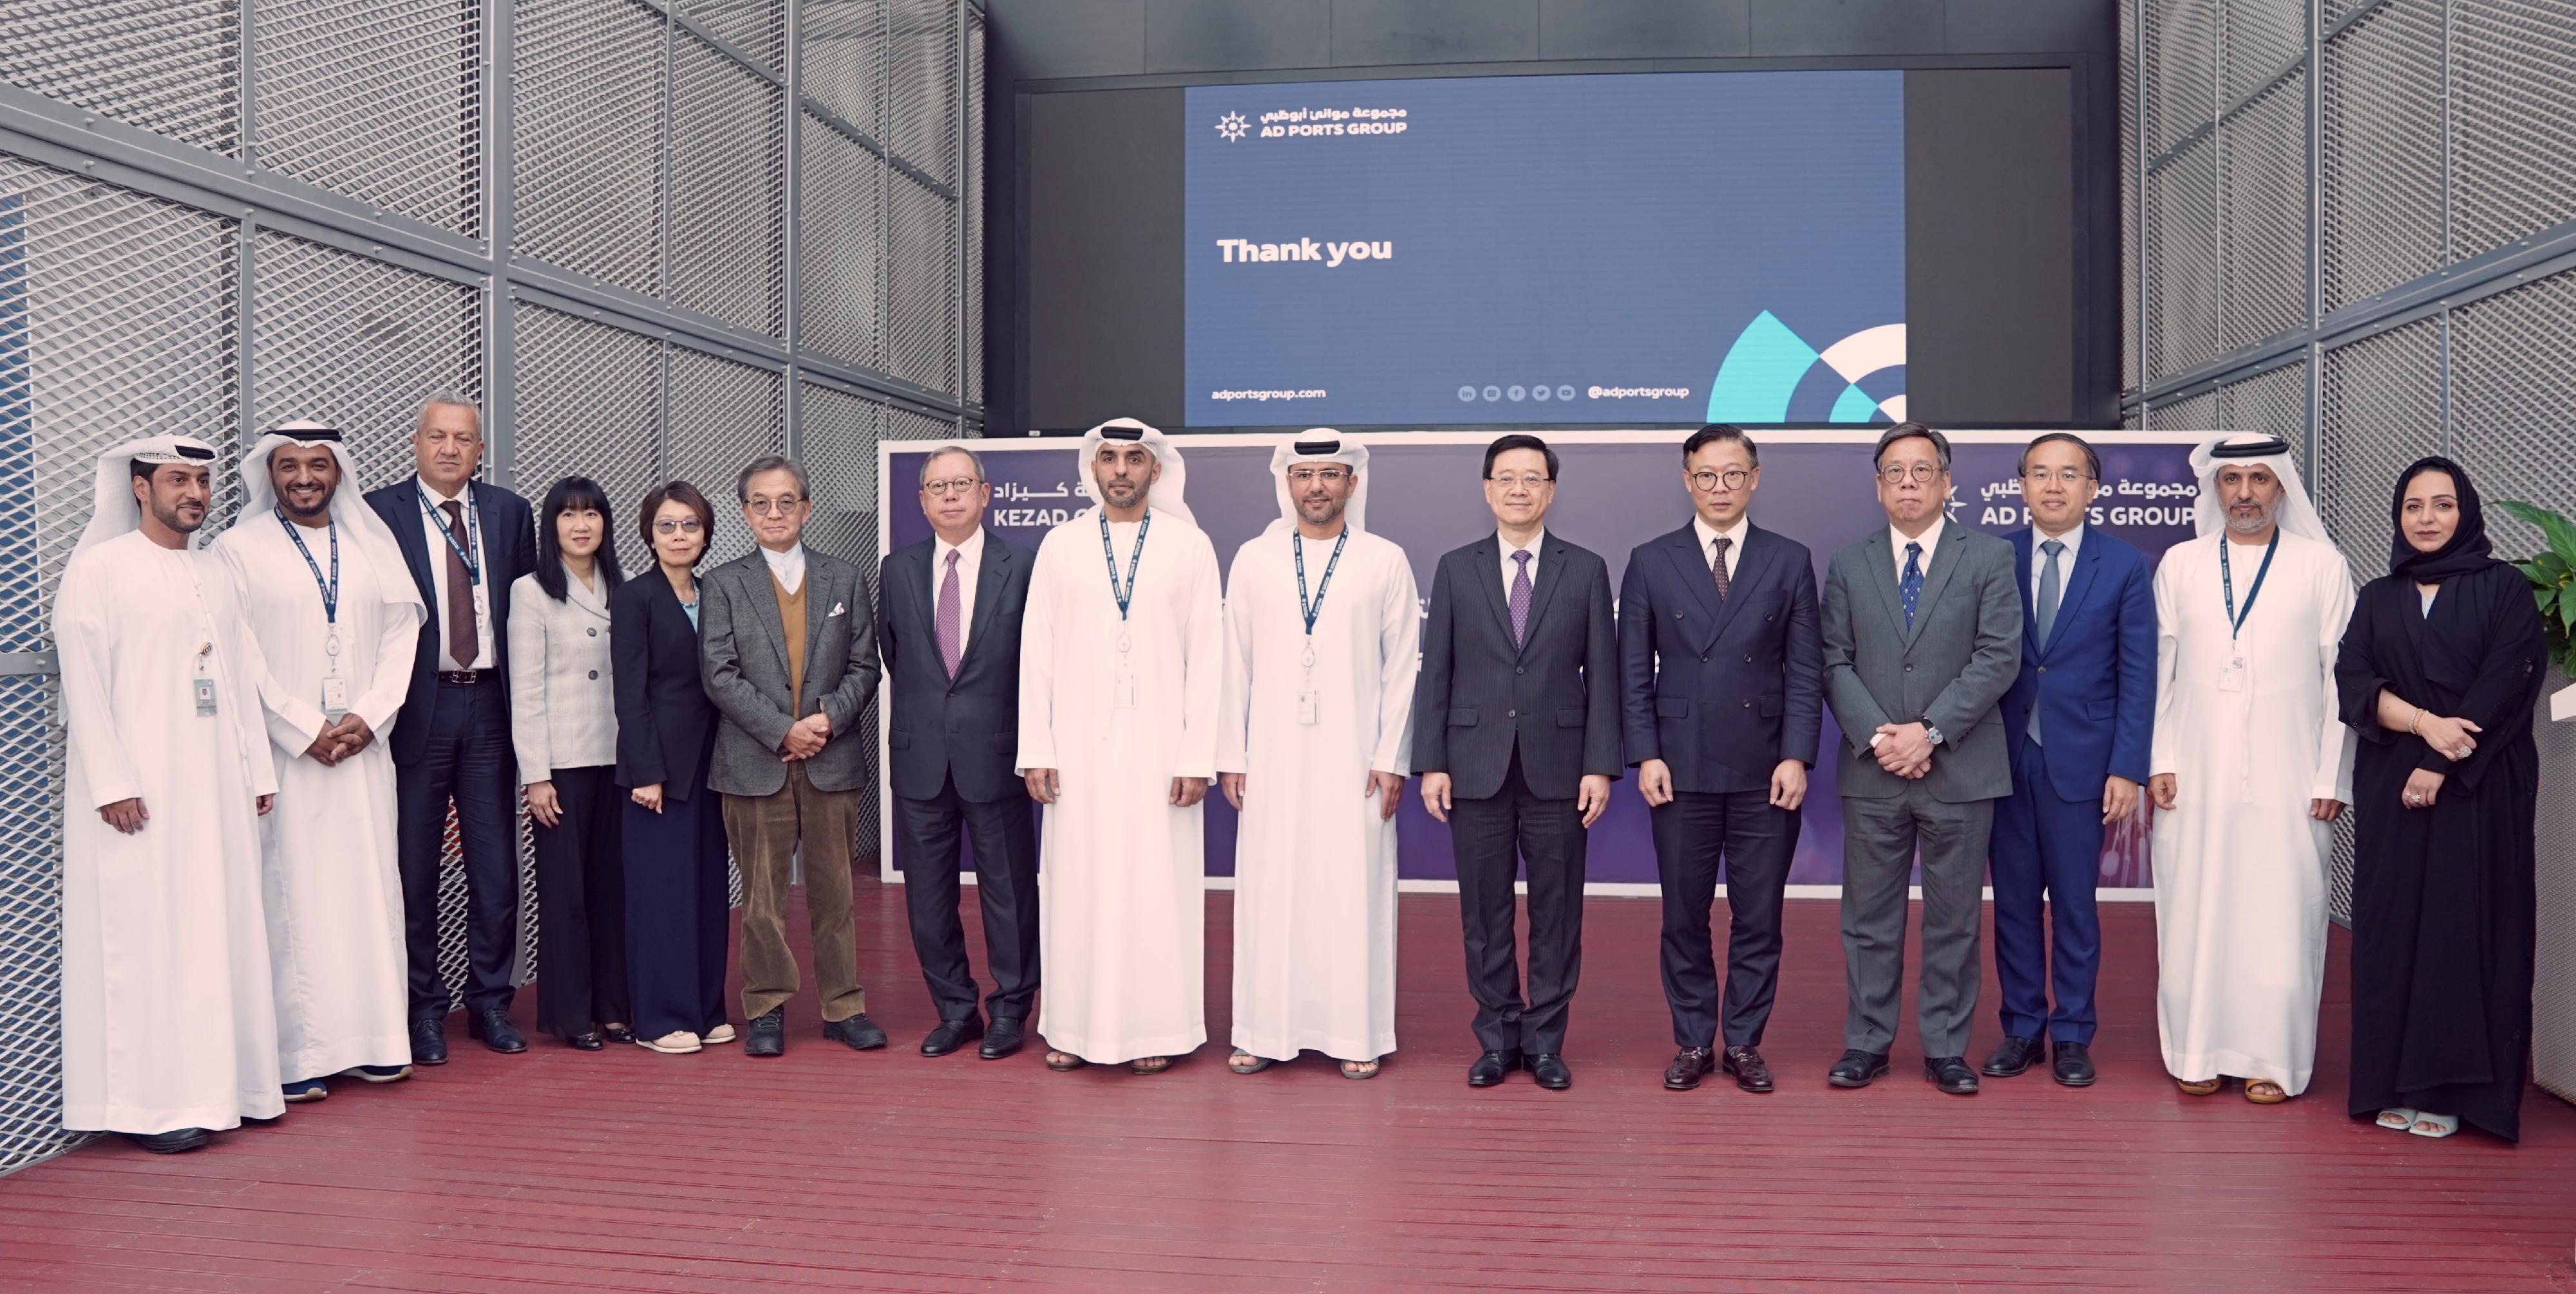 The Chief Executive, Mr John Lee, visited Abu Dhabi Ports Group in Abu Dhabi, the United Arab Emirates, today (February 8, Abu Dhabi time). Photo shows Mr Lee (sixth right); the Chief Executive Officer of Abu Dhabi Ports Group, Mr Mohamed Juma Al Shamisi (seventh right); the Deputy Secretary for Justice, Mr Cheung Kwok-kwan (fifth right); the Secretary for Financial Services and the Treasury, Mr Christopher Hui (third right); the Secretary for Commerce and Economic Development, Mr Algernon Yau (fourth right); the Chairman of the Hong Kong Trade Development Council, Dr Peter Lam (seventh left); the Executive Director of the Hong Kong Trade Development Council, Miss Margaret Fong (fourth left); the Chairman of Airport Authority Hong Kong, Mr Jack So (sixth left); the Chairman of the Hong Kong General Chamber of Commerce, Mrs Betty Yuen (fifth left); and representatives of Abu Dhabi Ports Group at the welcoming lunch.